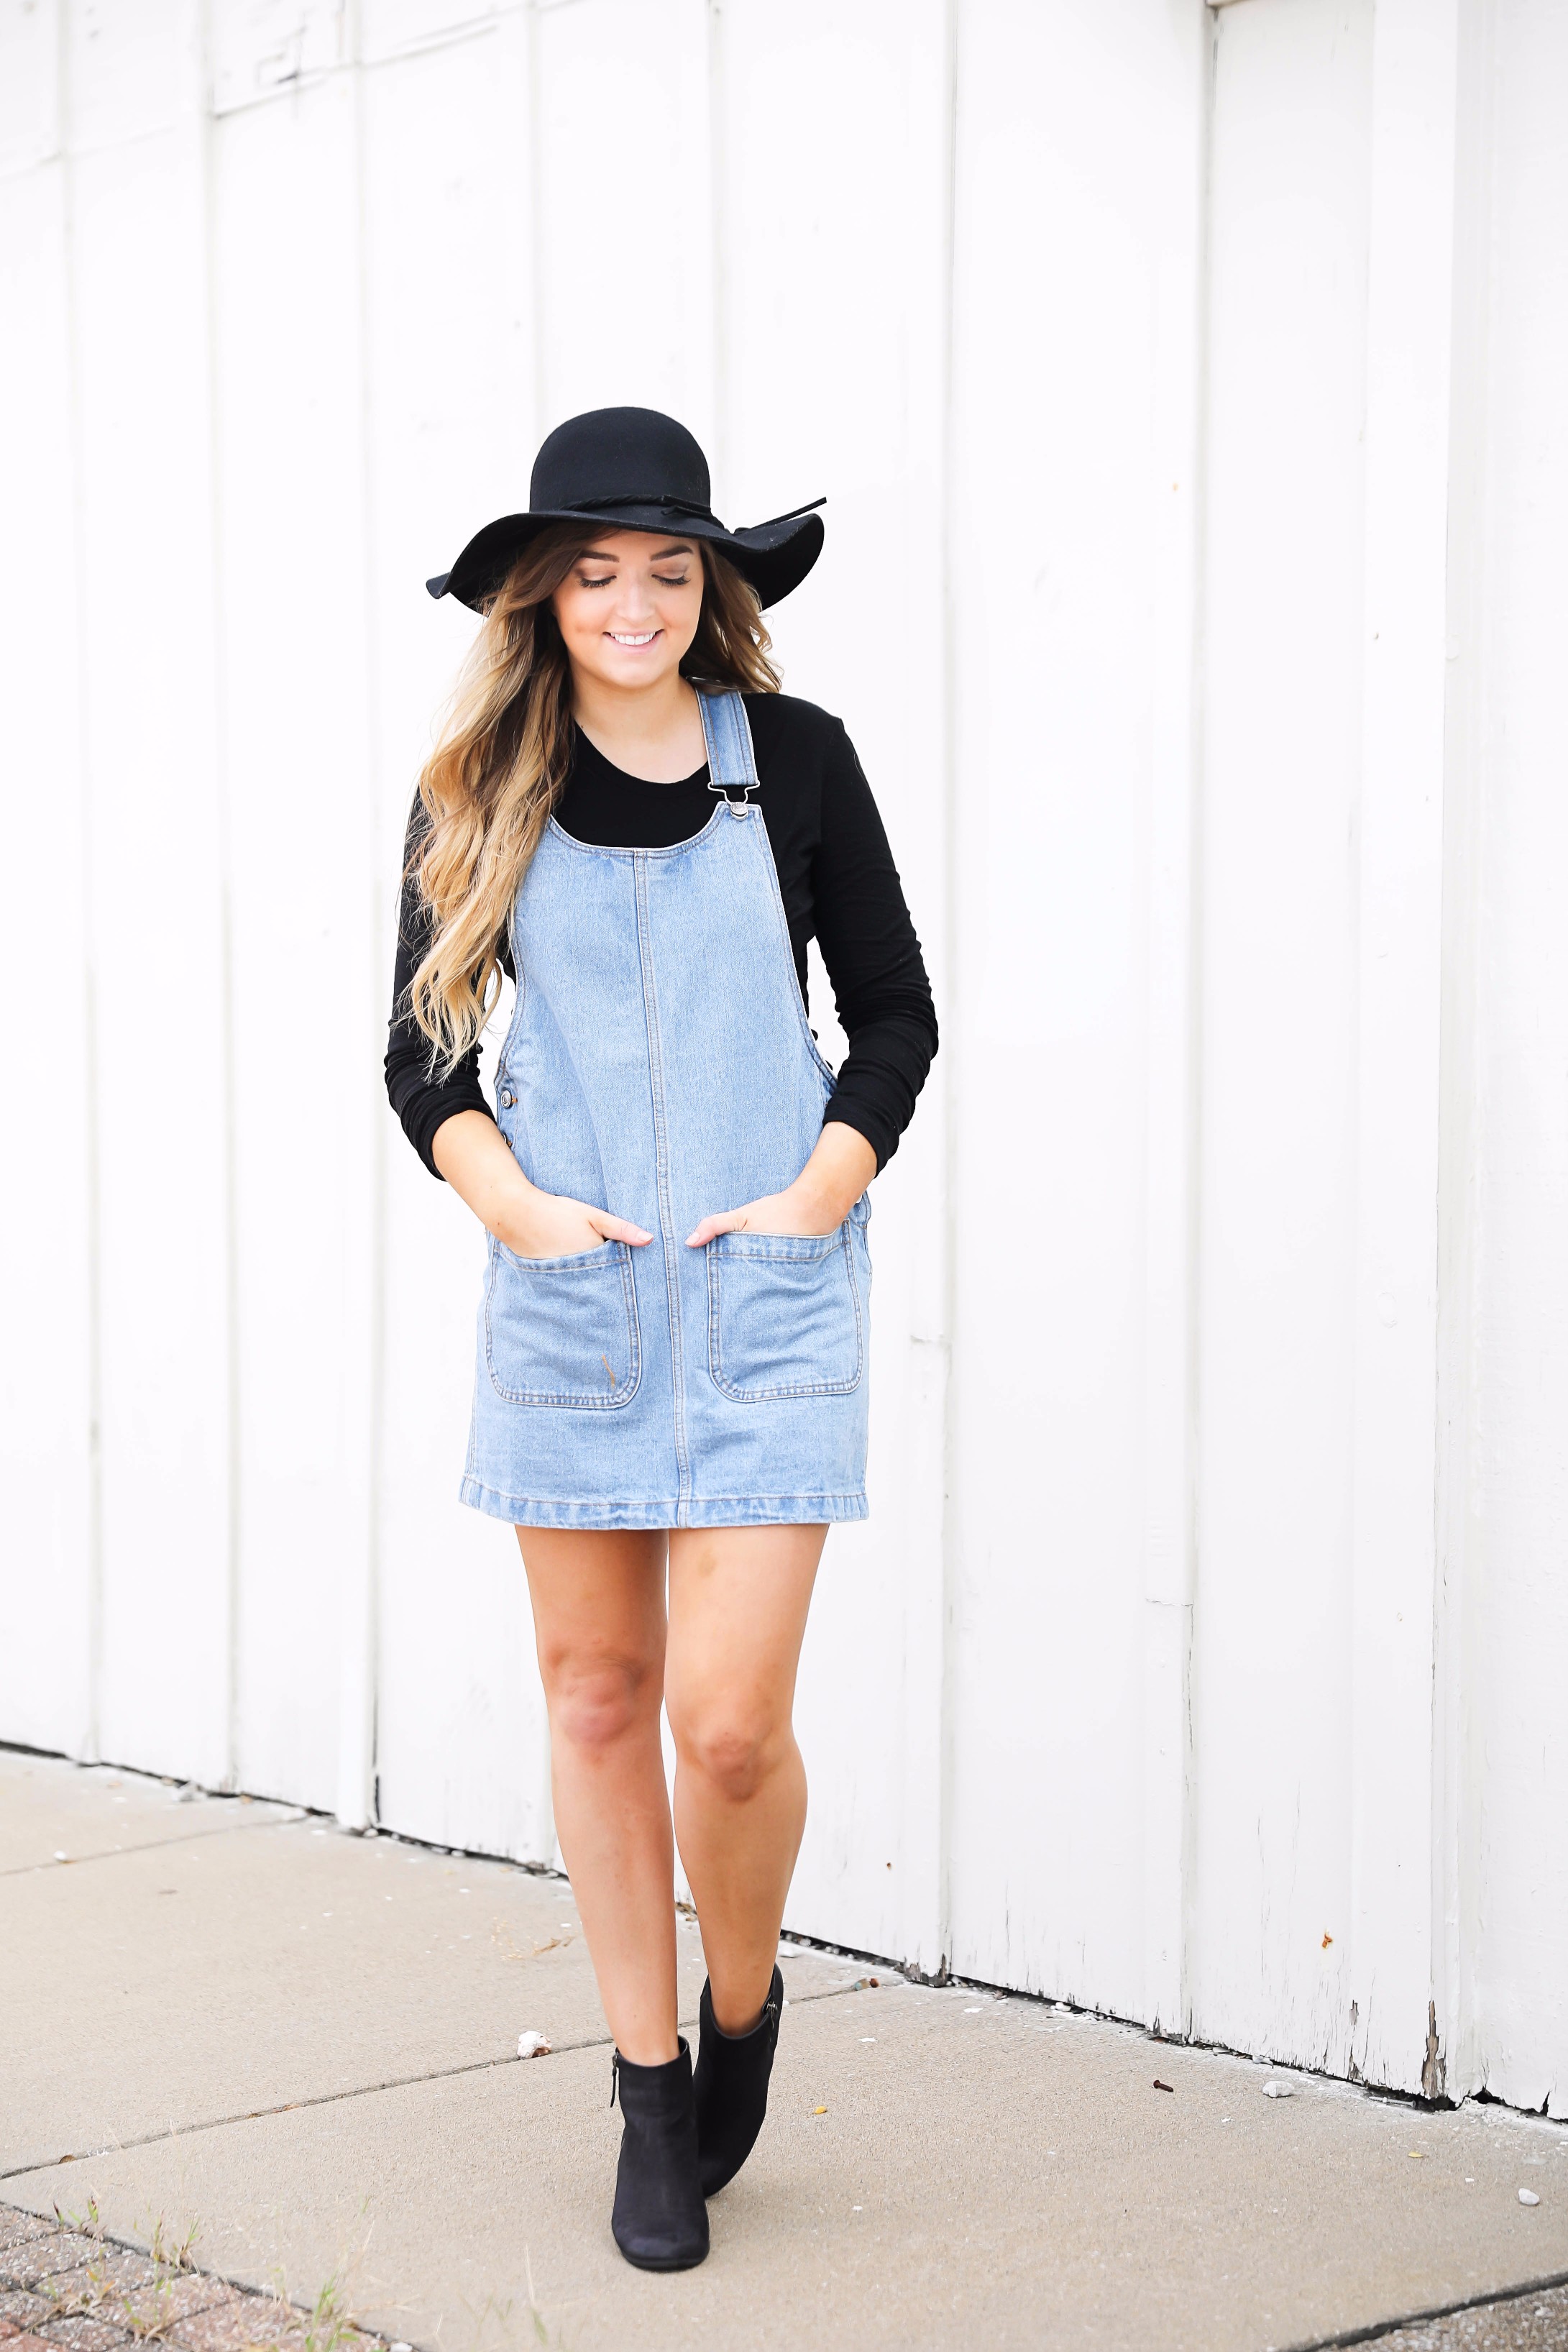 Overall dress and black floppy hat and black booties on fashion blog daily dose of charm by lauren lindmark 4P6A7169